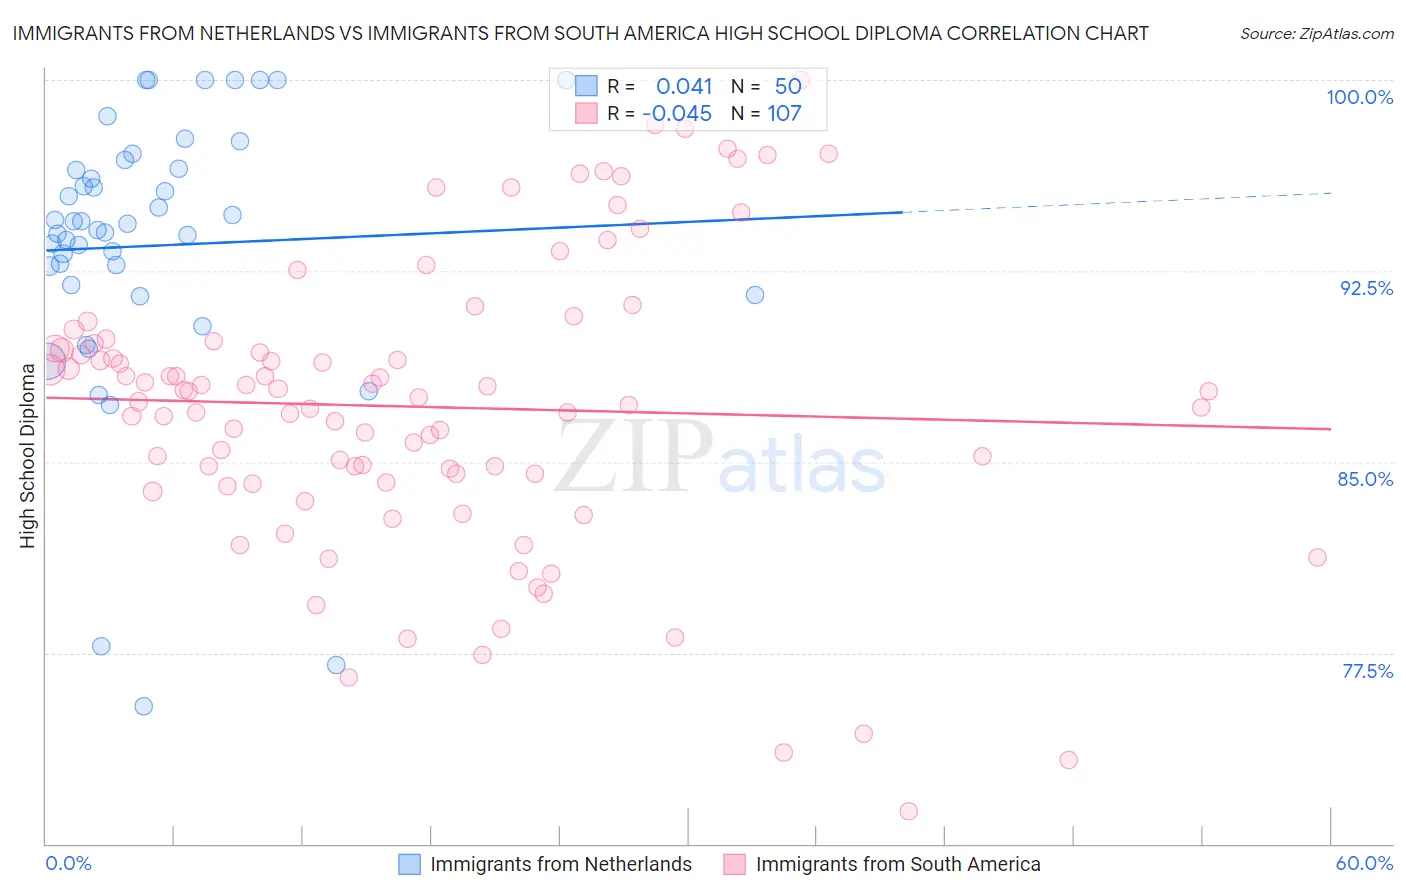 Immigrants from Netherlands vs Immigrants from South America High School Diploma